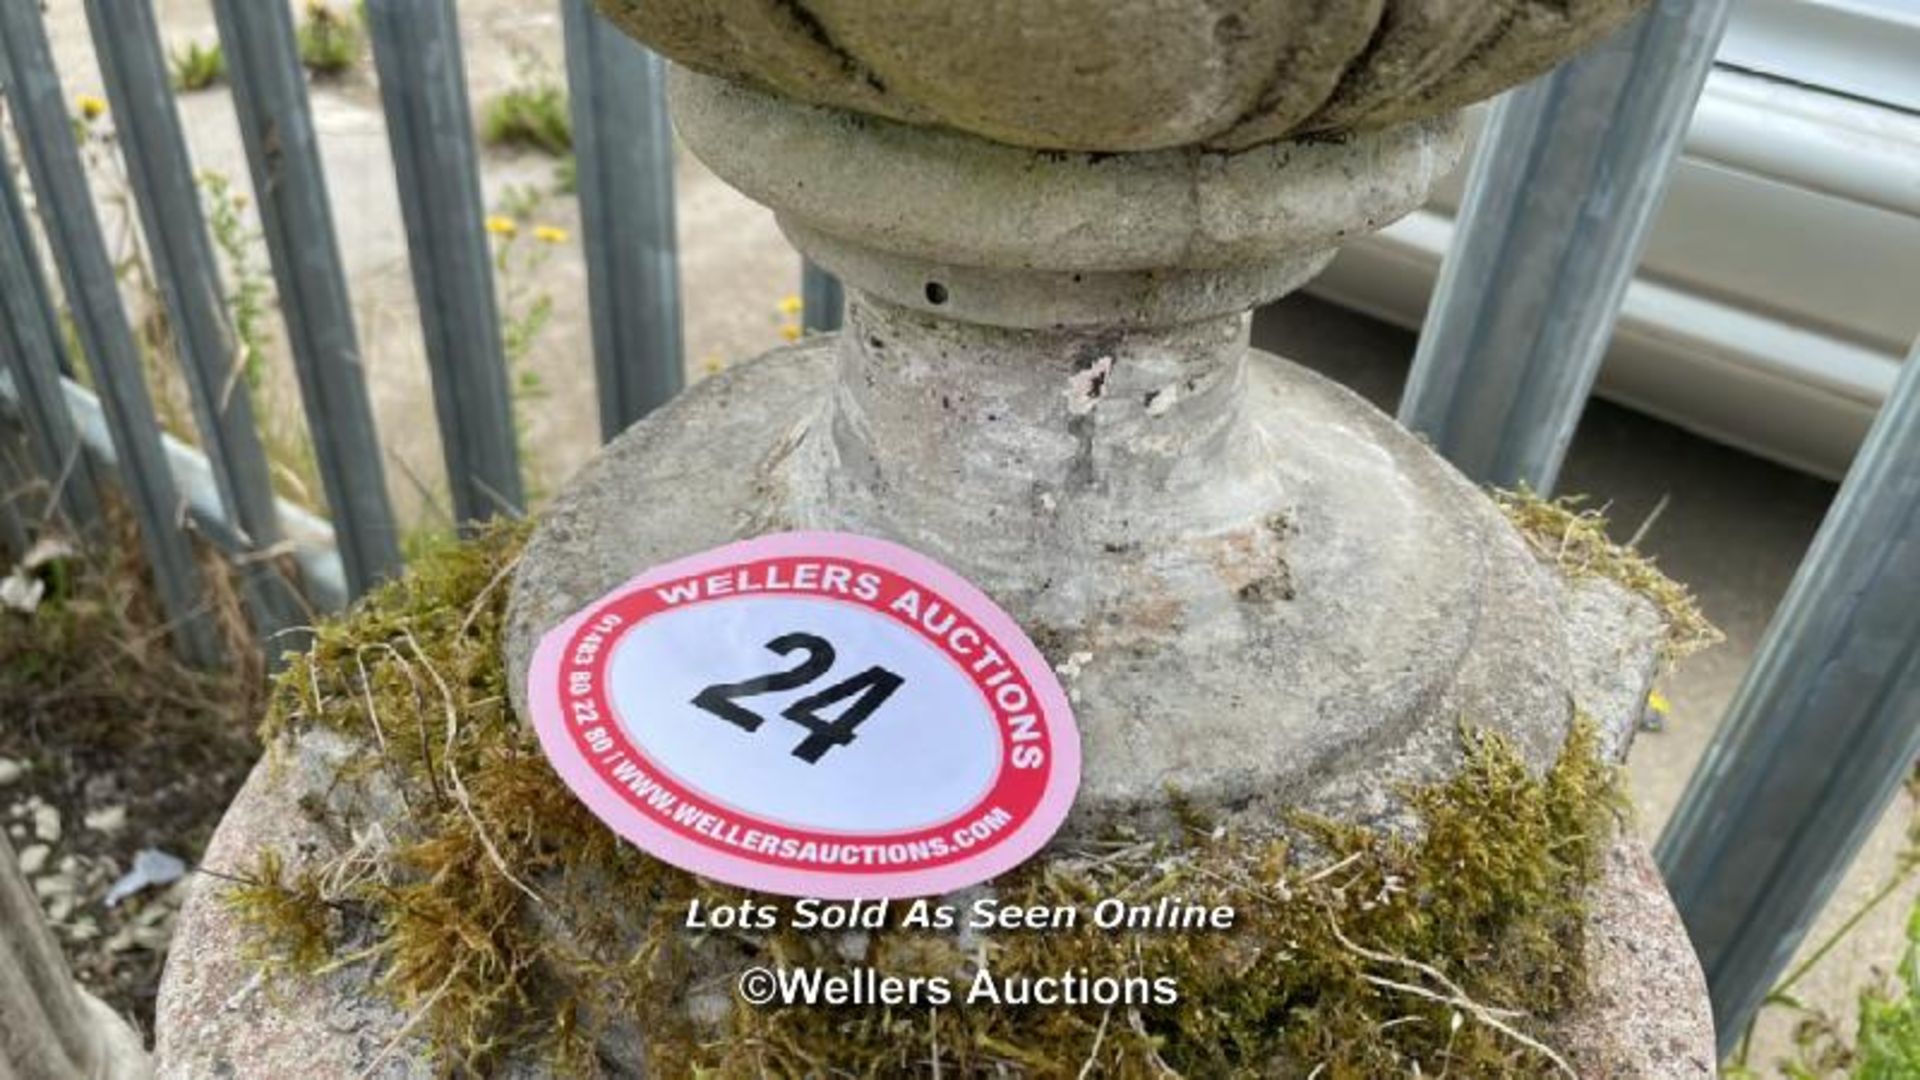 *RECONSTITUTED STONE FINIAL, 55CM (H) / COLLECTION LOCATION: ALBOURNE (BN6), FULL ADDRESS AND CONTAC - Image 3 of 3